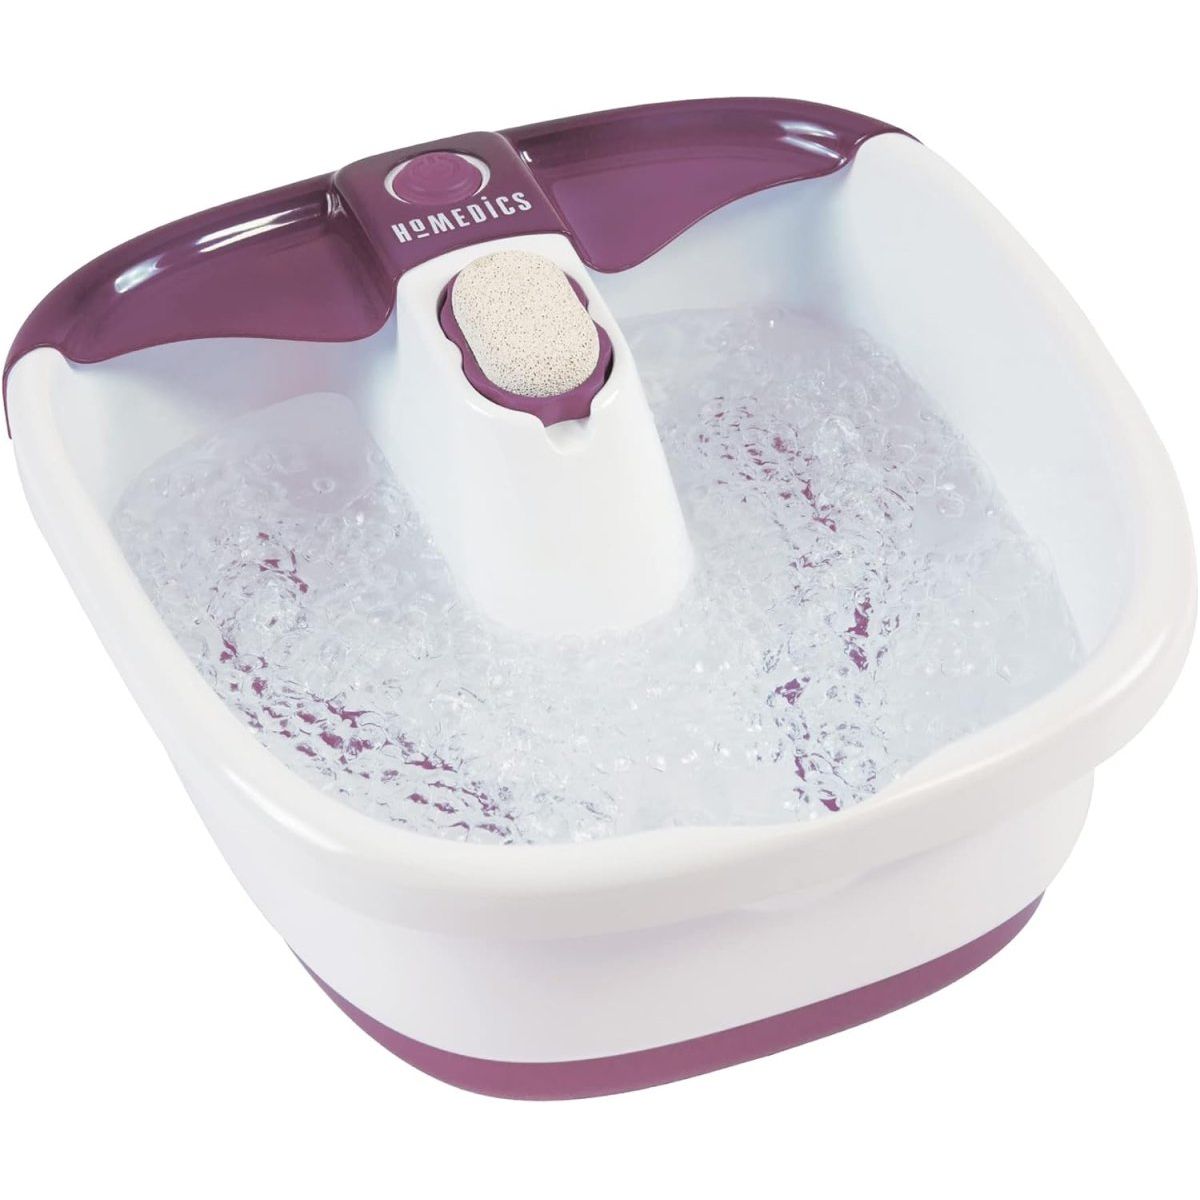 Bubblemate Foot Spa and Massager with Keep Warm Function, Soothing Soak Massage - DG International Ventures Limited